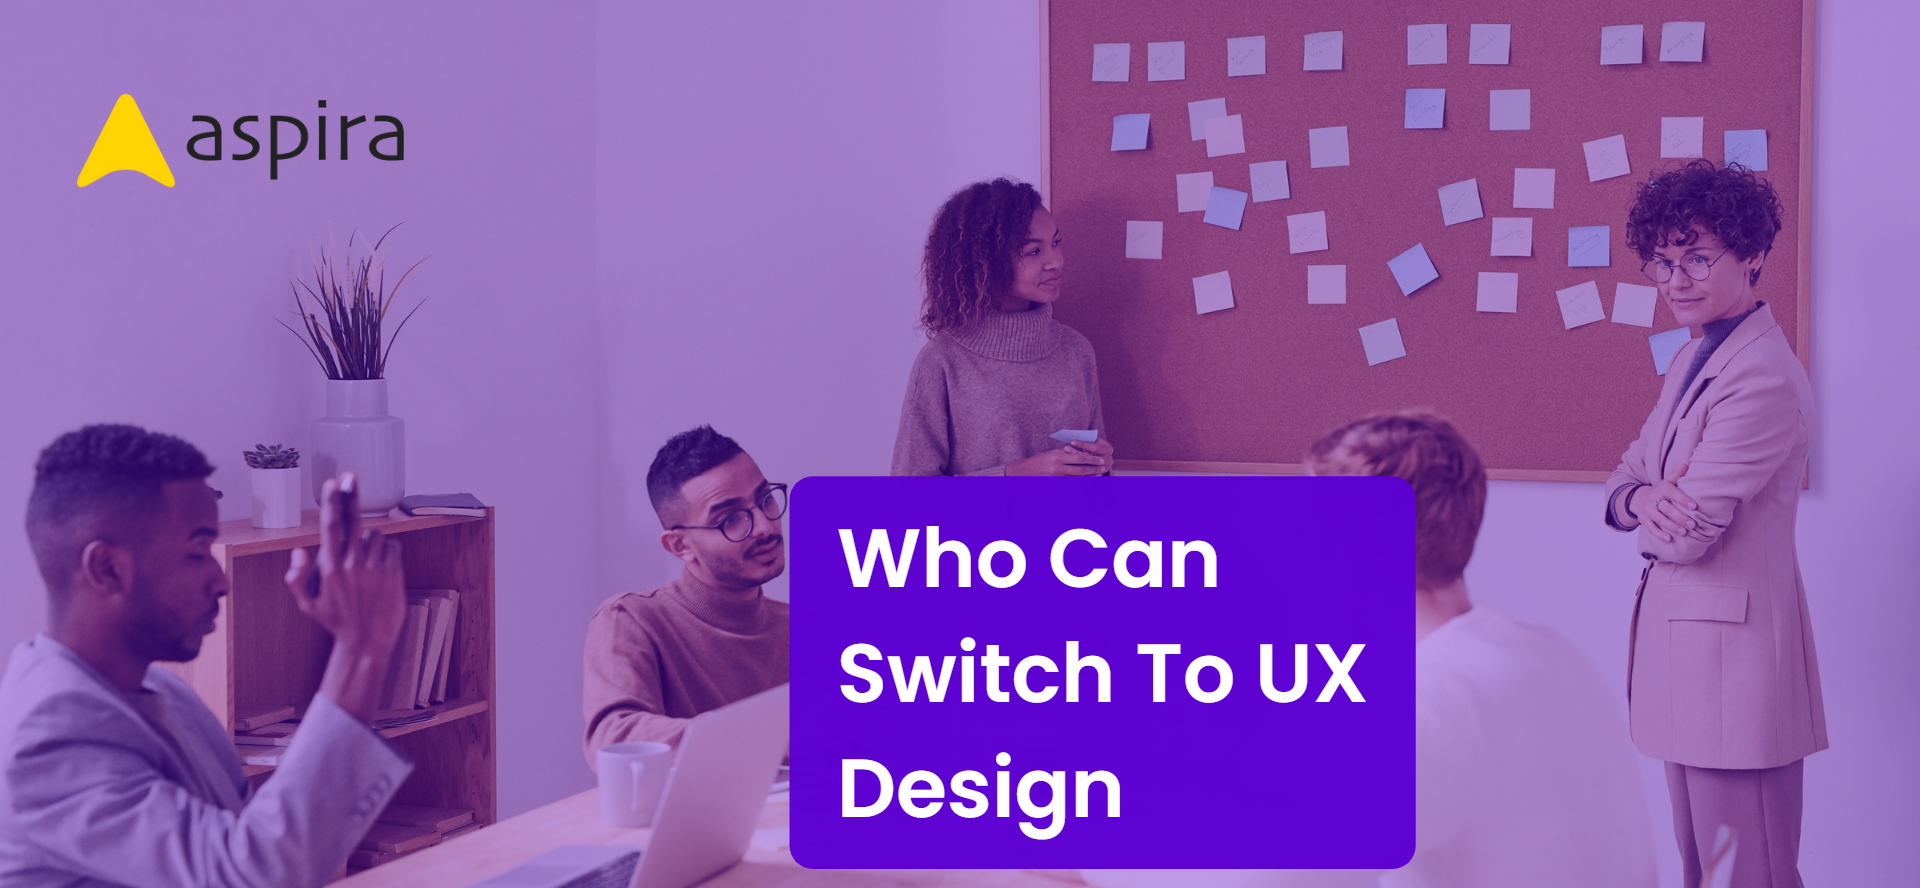 Who can switch to UX design